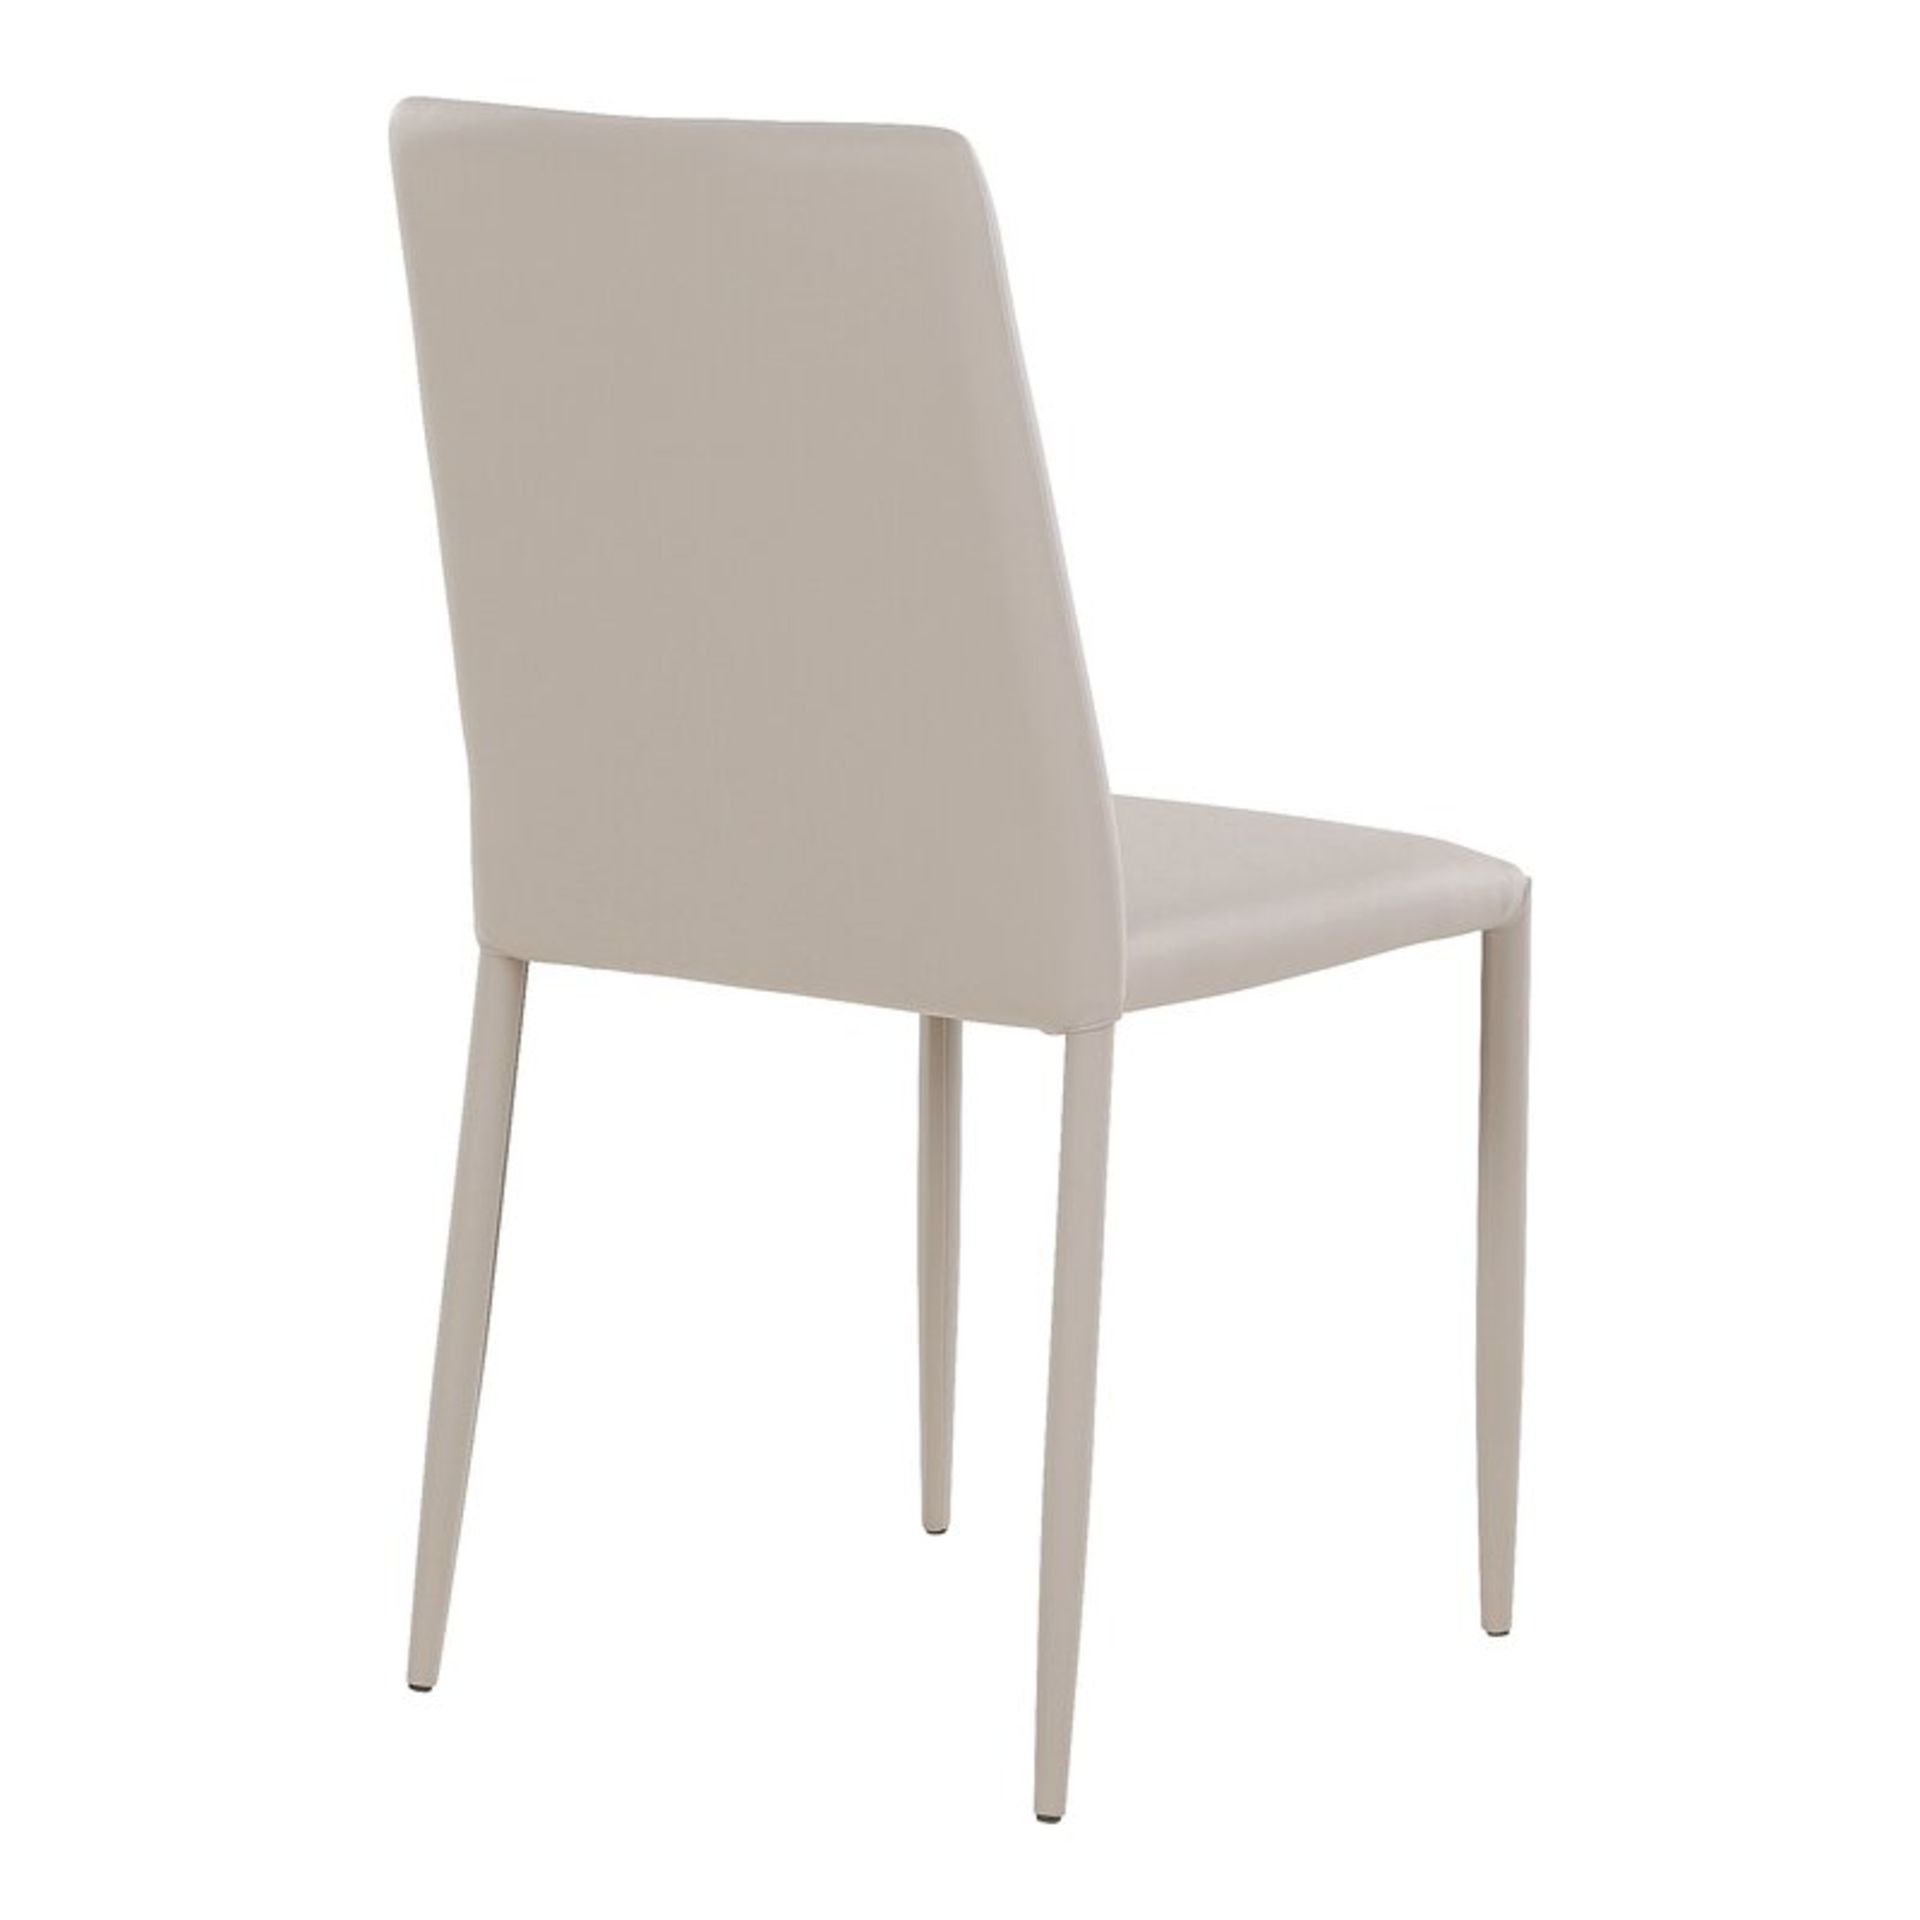 Hashtag Home Earnest Armless Stacking Chair - Image 3 of 4